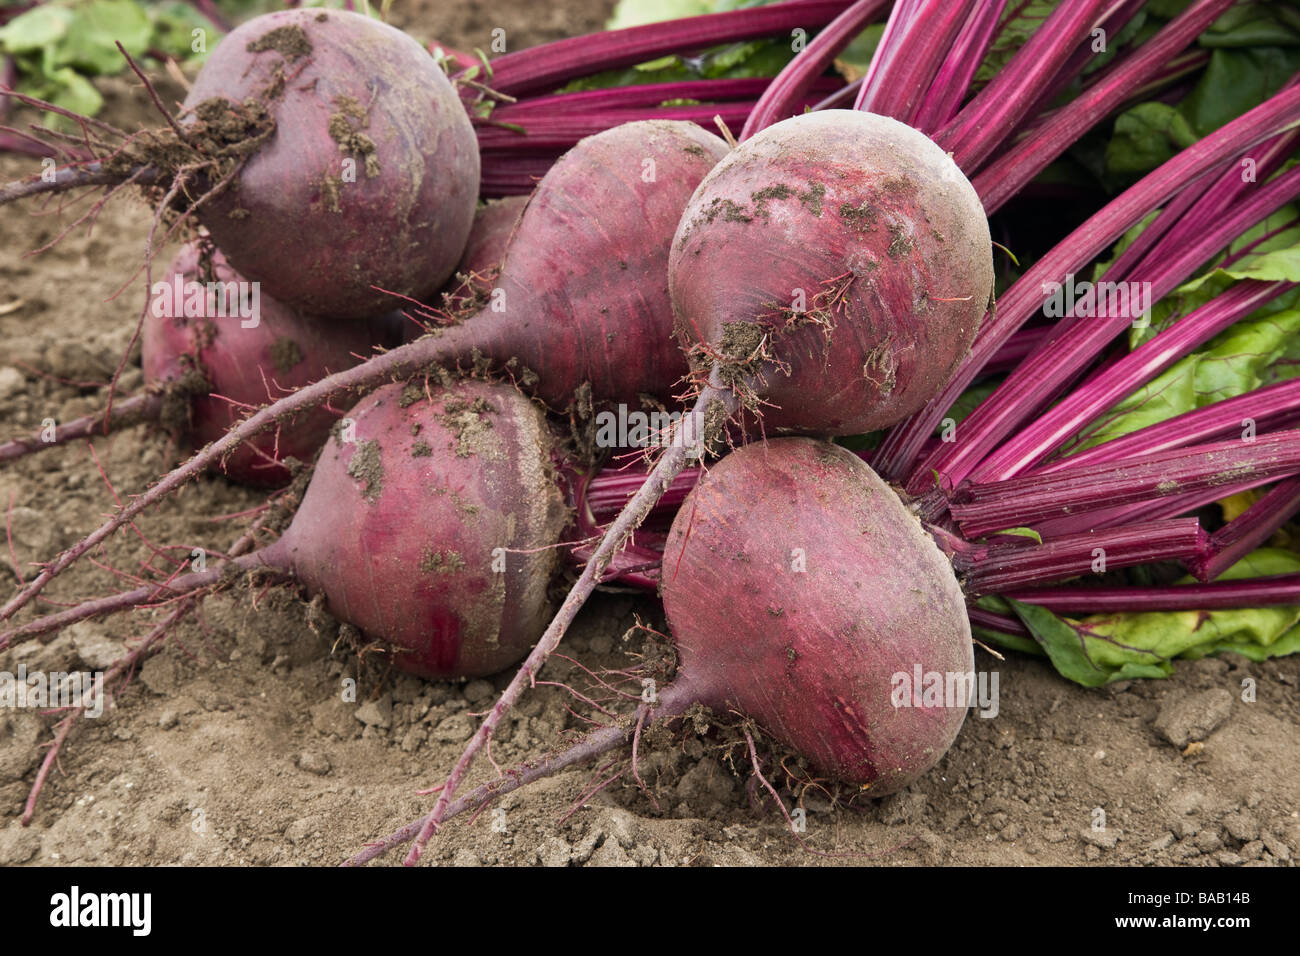 Harvested Beets, organic vegetable. Stock Photo